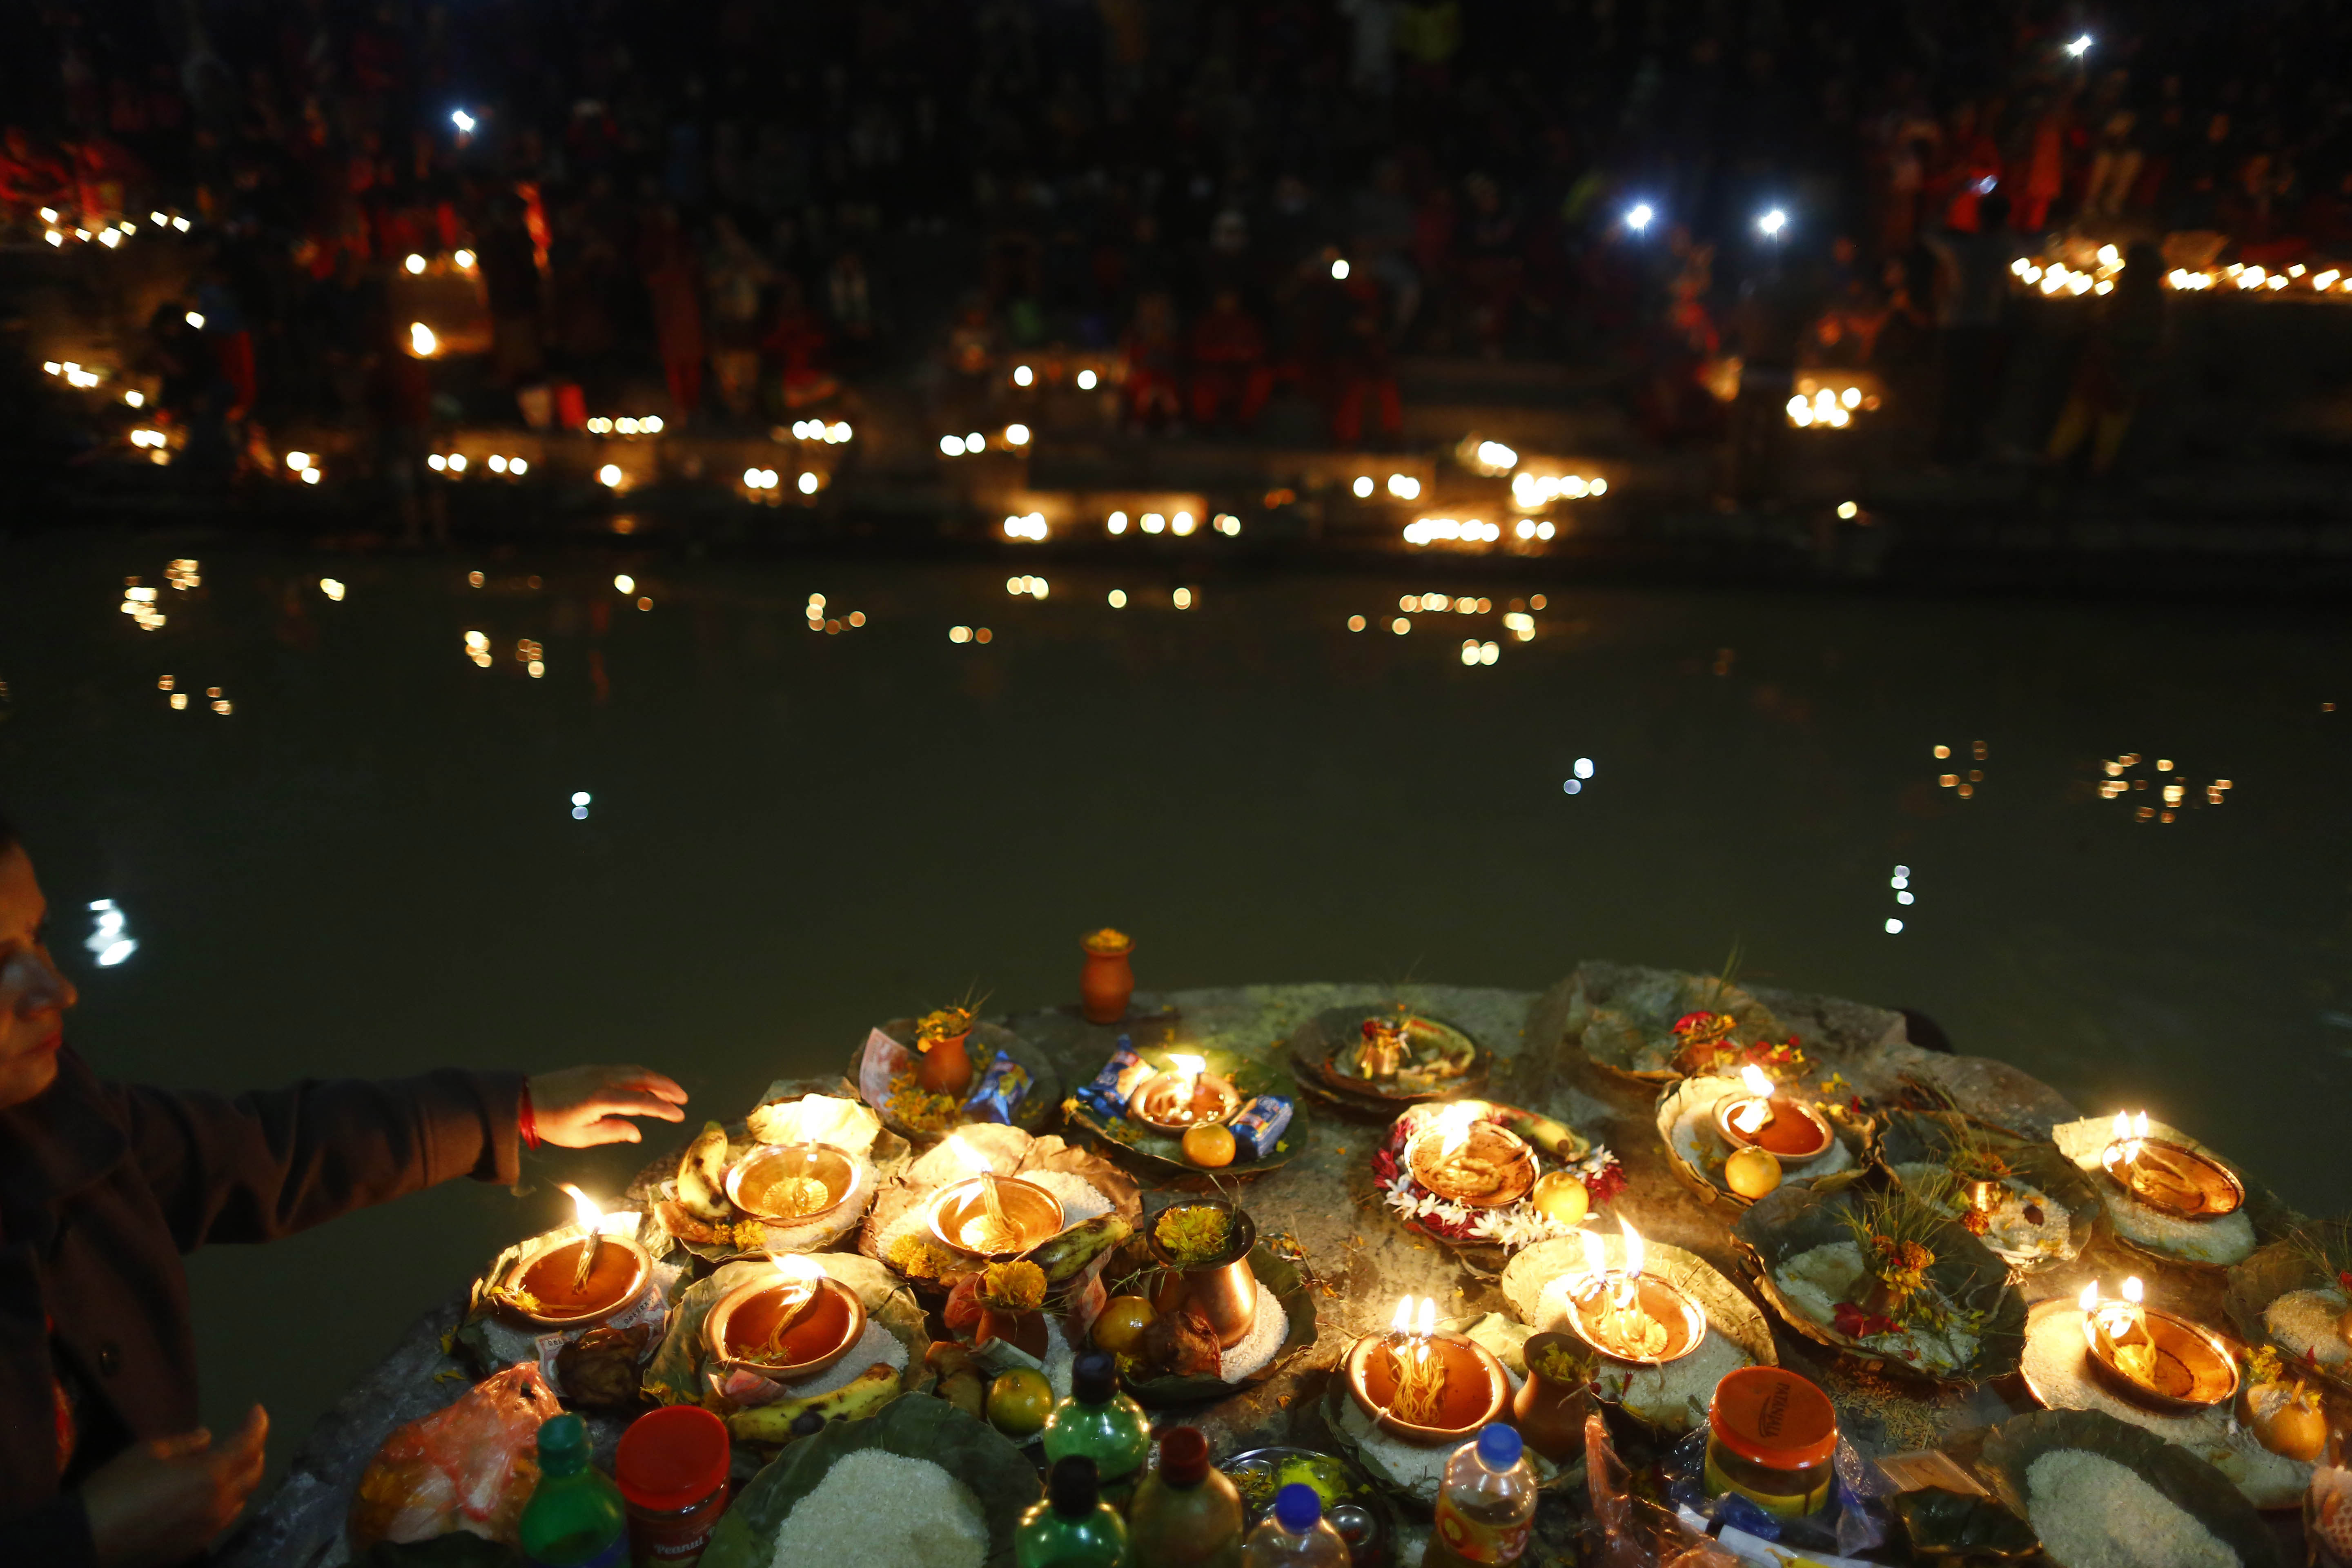 Nepali devotees light oil lamps in remembrance of their departed family members during Bala Chaturdashi festival, at Pashupatinath Temple, in Kathmandu, on Wednesday, December 05, 2018. Bala Chaturdashi festival is observed in remembrance of late beloved ones by performing rituals that are believed would secure a better place in heaven for the departed souls. Photo: Skanda Gautam/THT